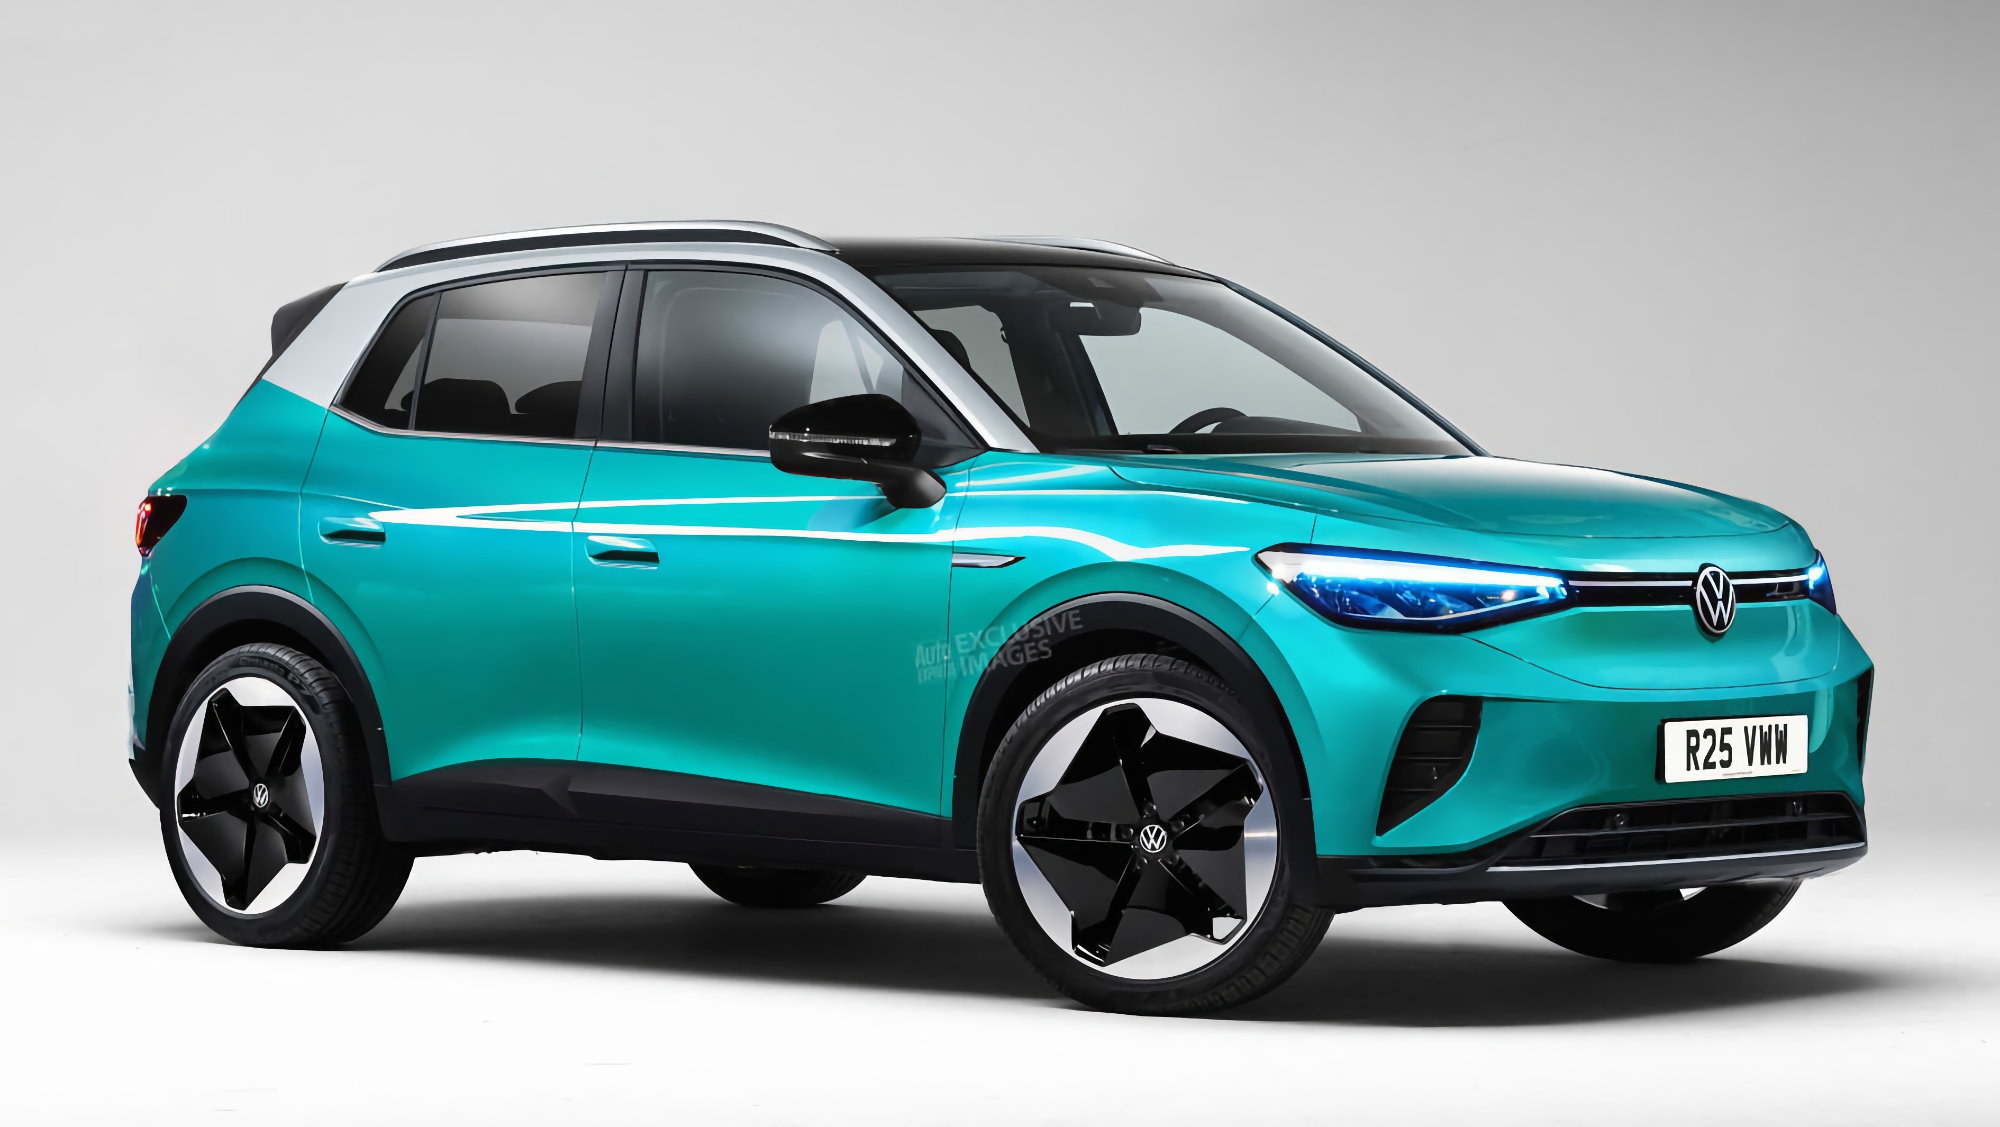 Volkswagen is working on the ID.2: an electric car with a range of up to 300 km and a price tag starting at €20,000